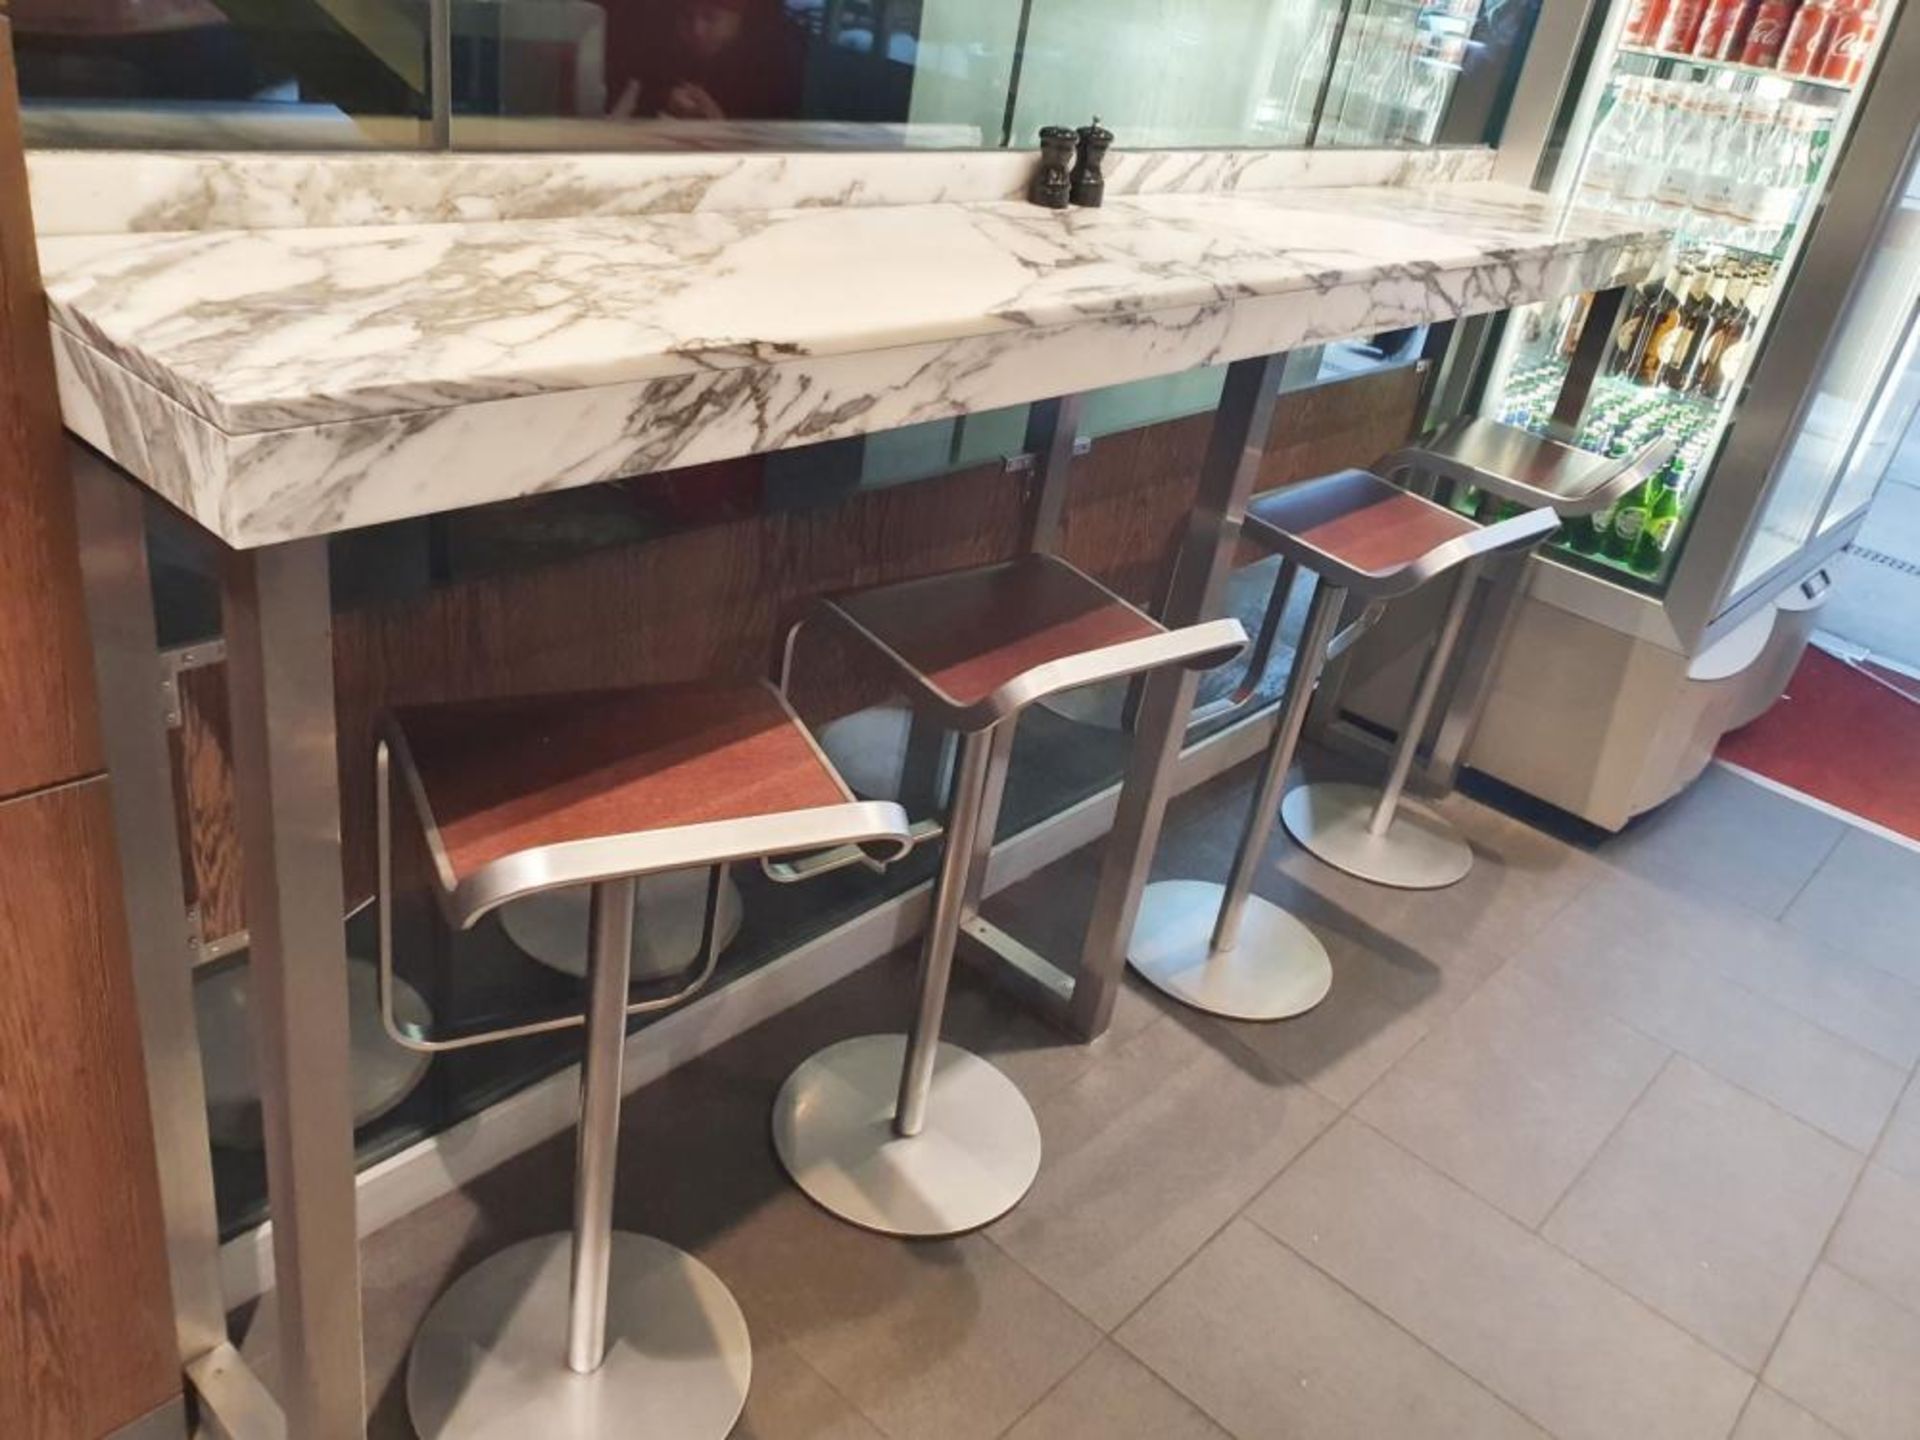 1 x White Marble/Granite Breakfast / Coffee Bar - Two Piece - From A Milan-style City Centre Cafe